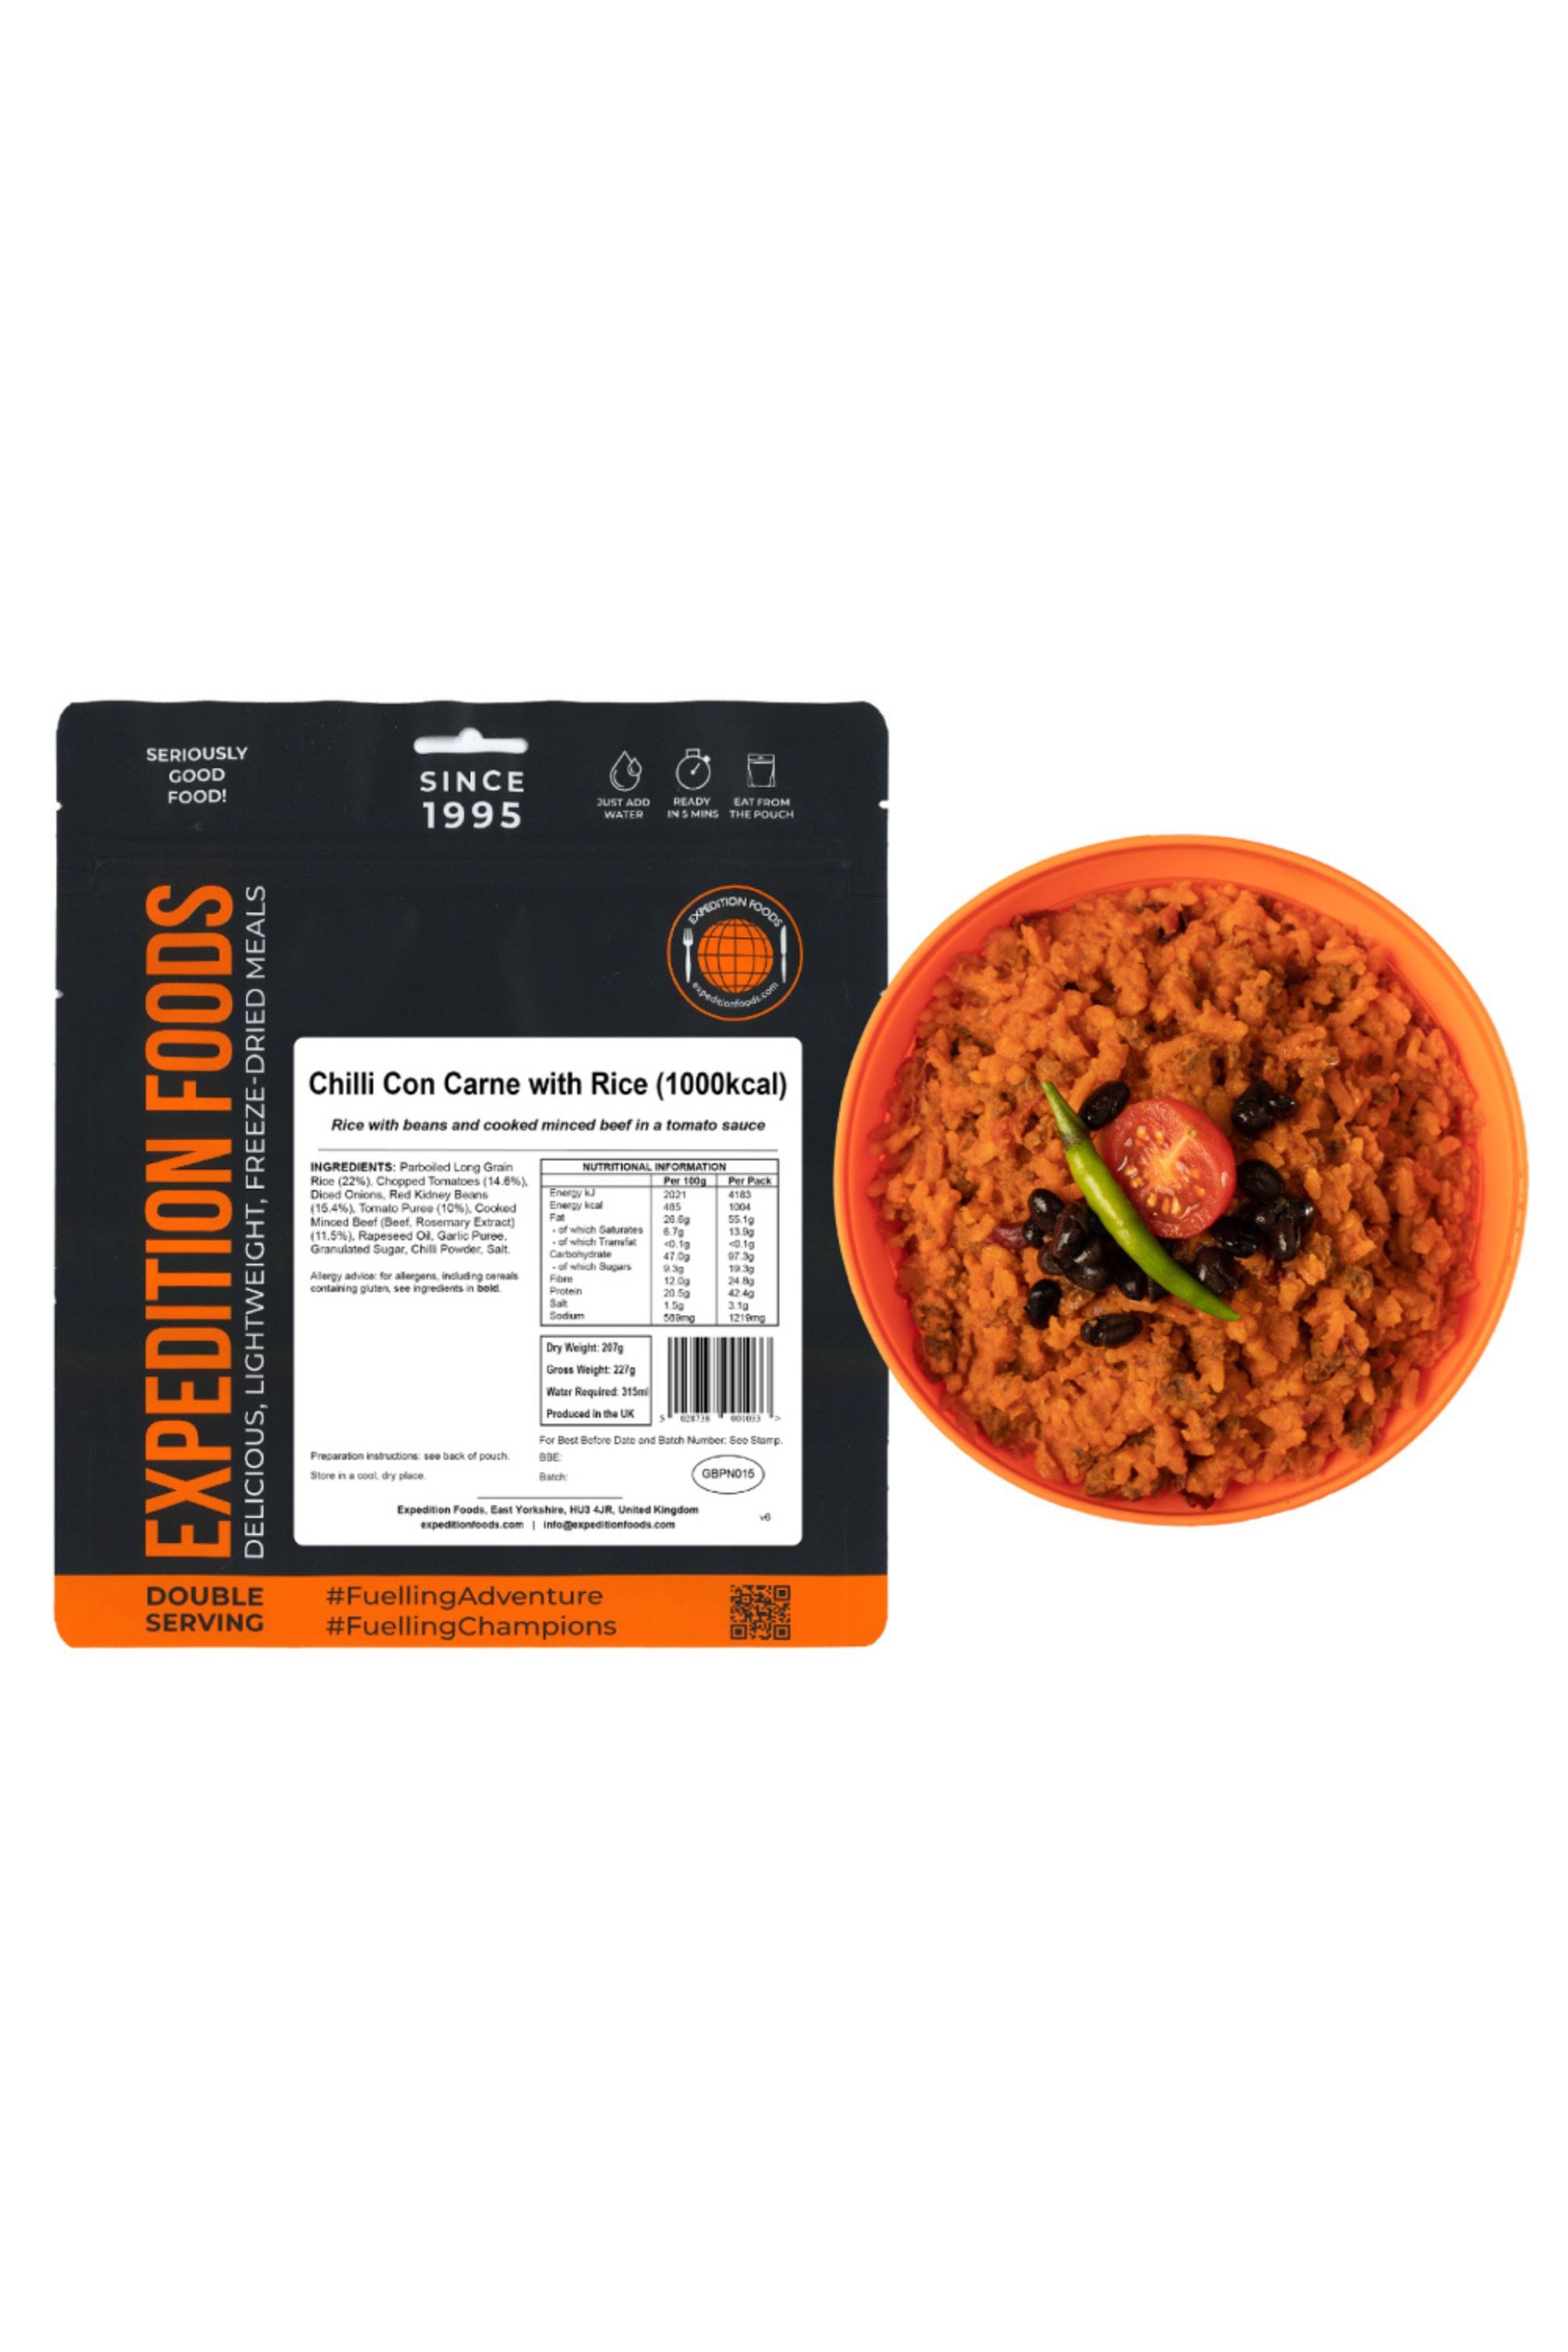 Chilli Con Carne with Rice Camping Food (1000kcal) -